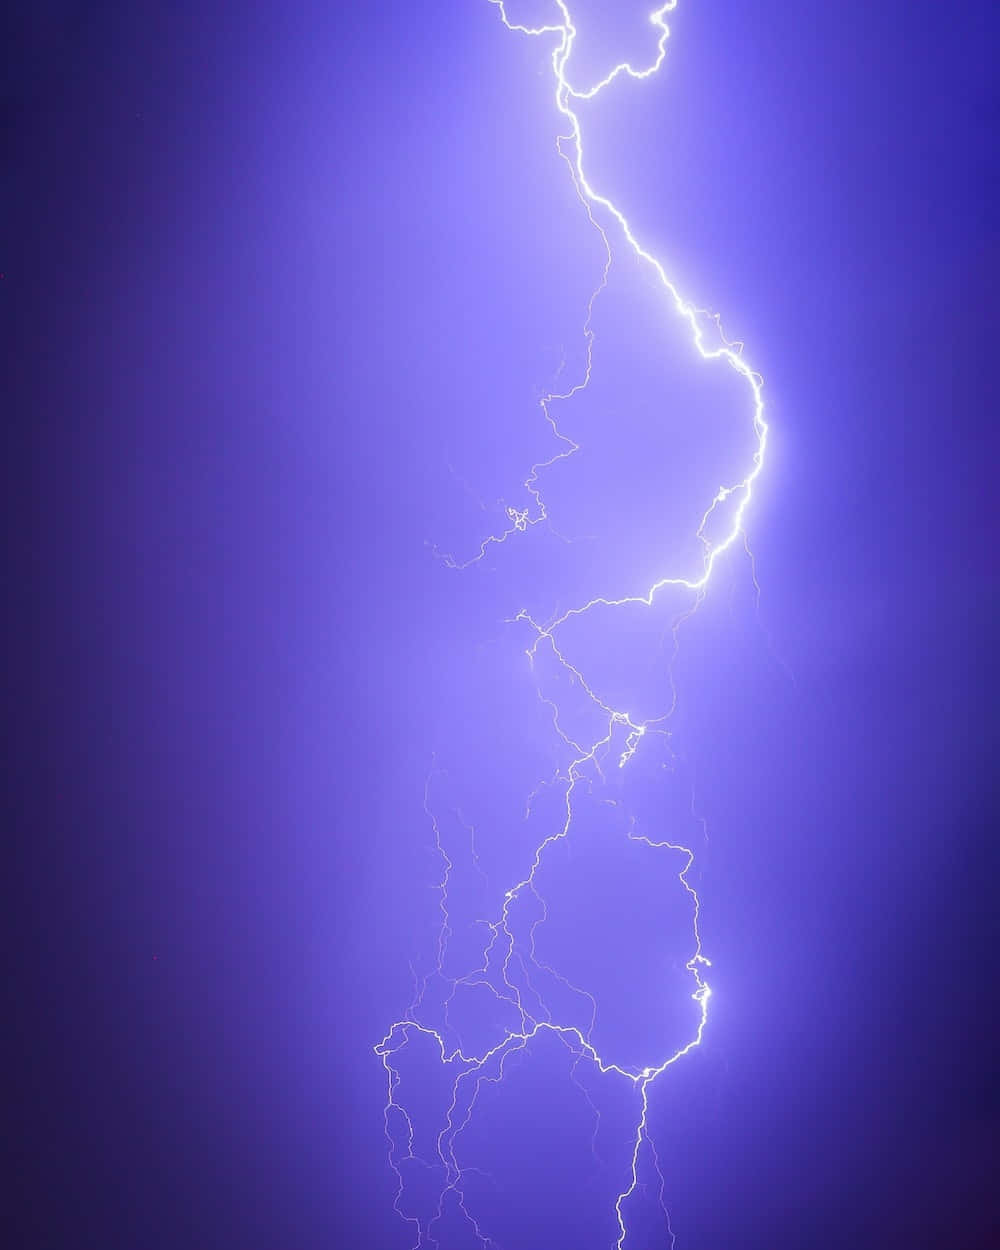 A Powerful Conglomeration of Lightning